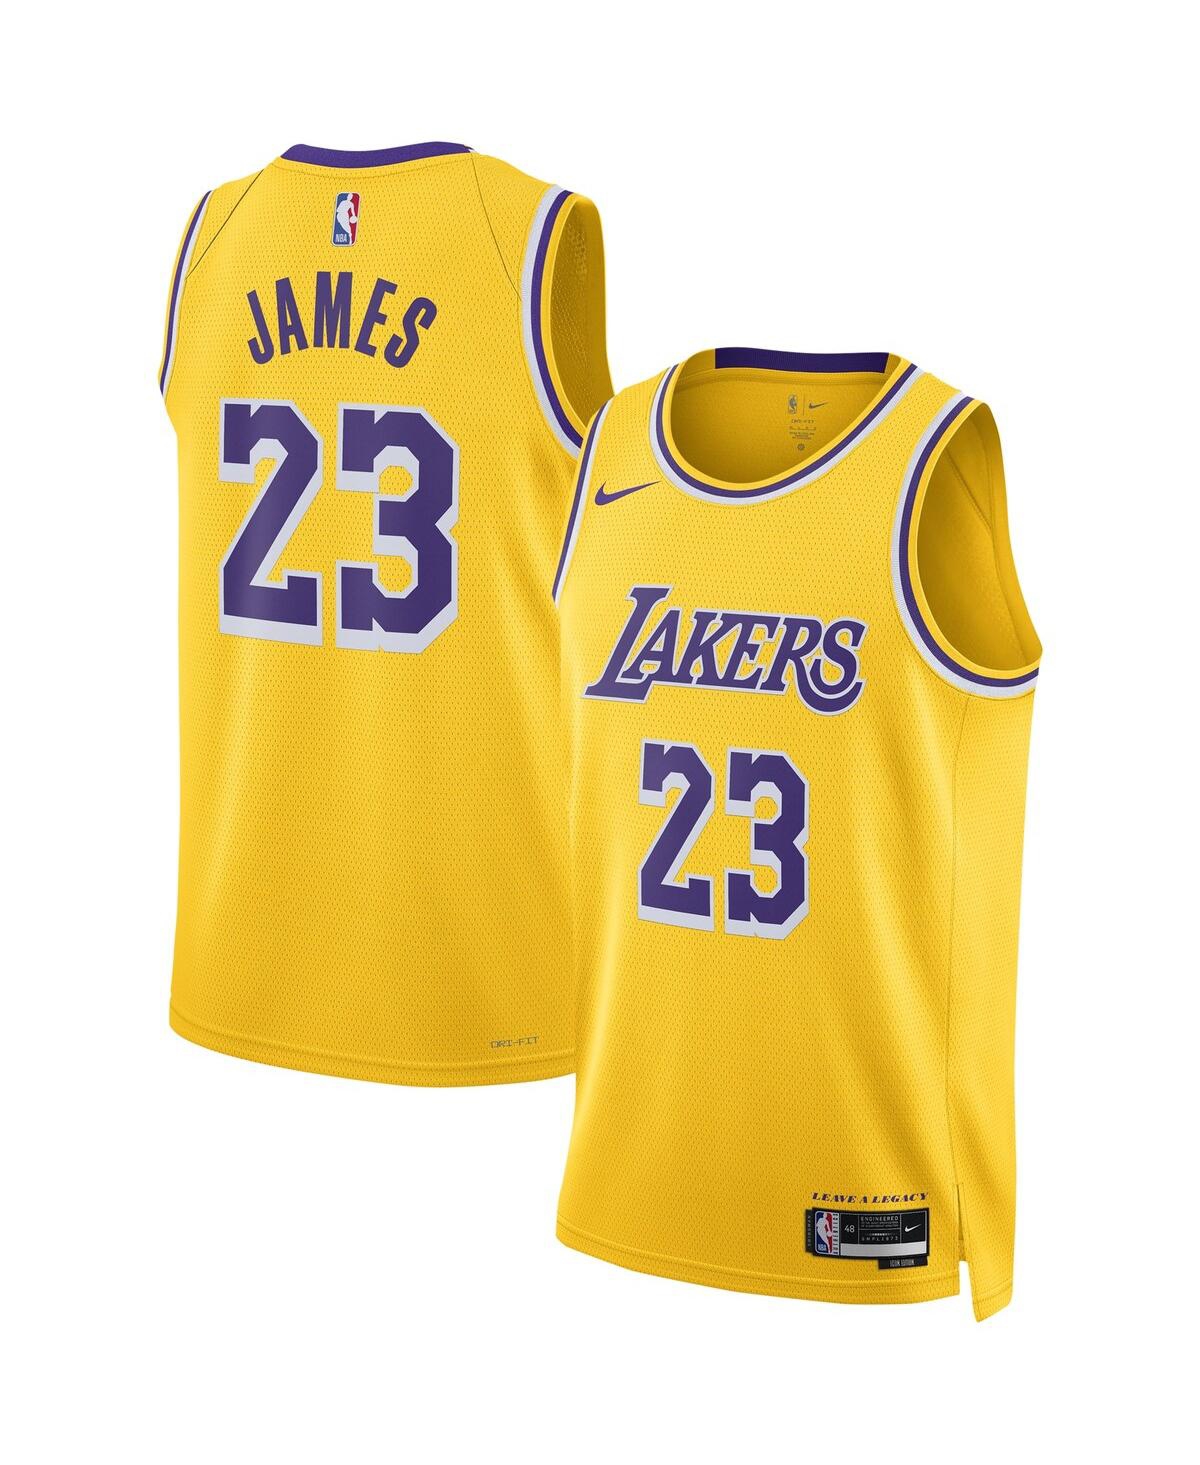 Men's and Women's Nike LeBron James Gold Los Angeles Lakers Swingman Jersey - Icon Edition - Gold